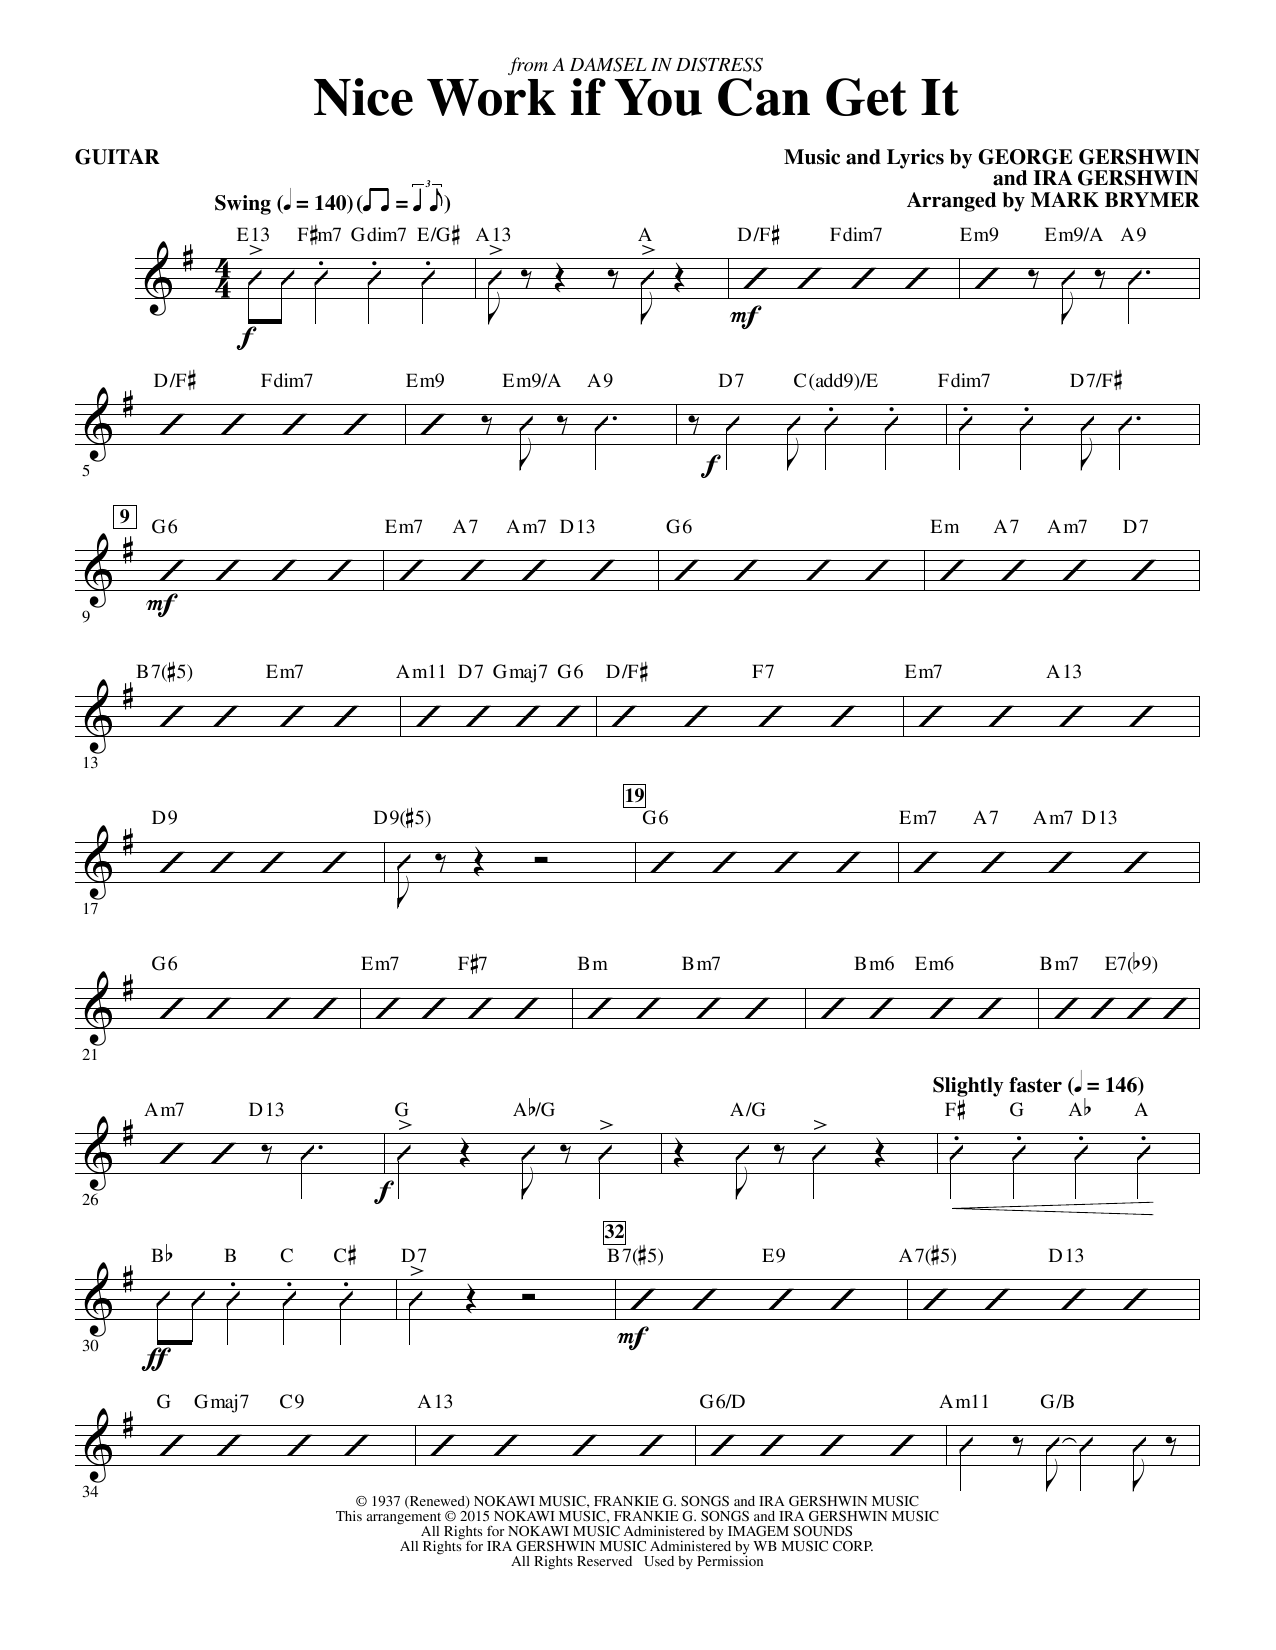 Mark Brymer Nice Work If You Can Get It - Guitar sheet music notes and chords. Download Printable PDF.